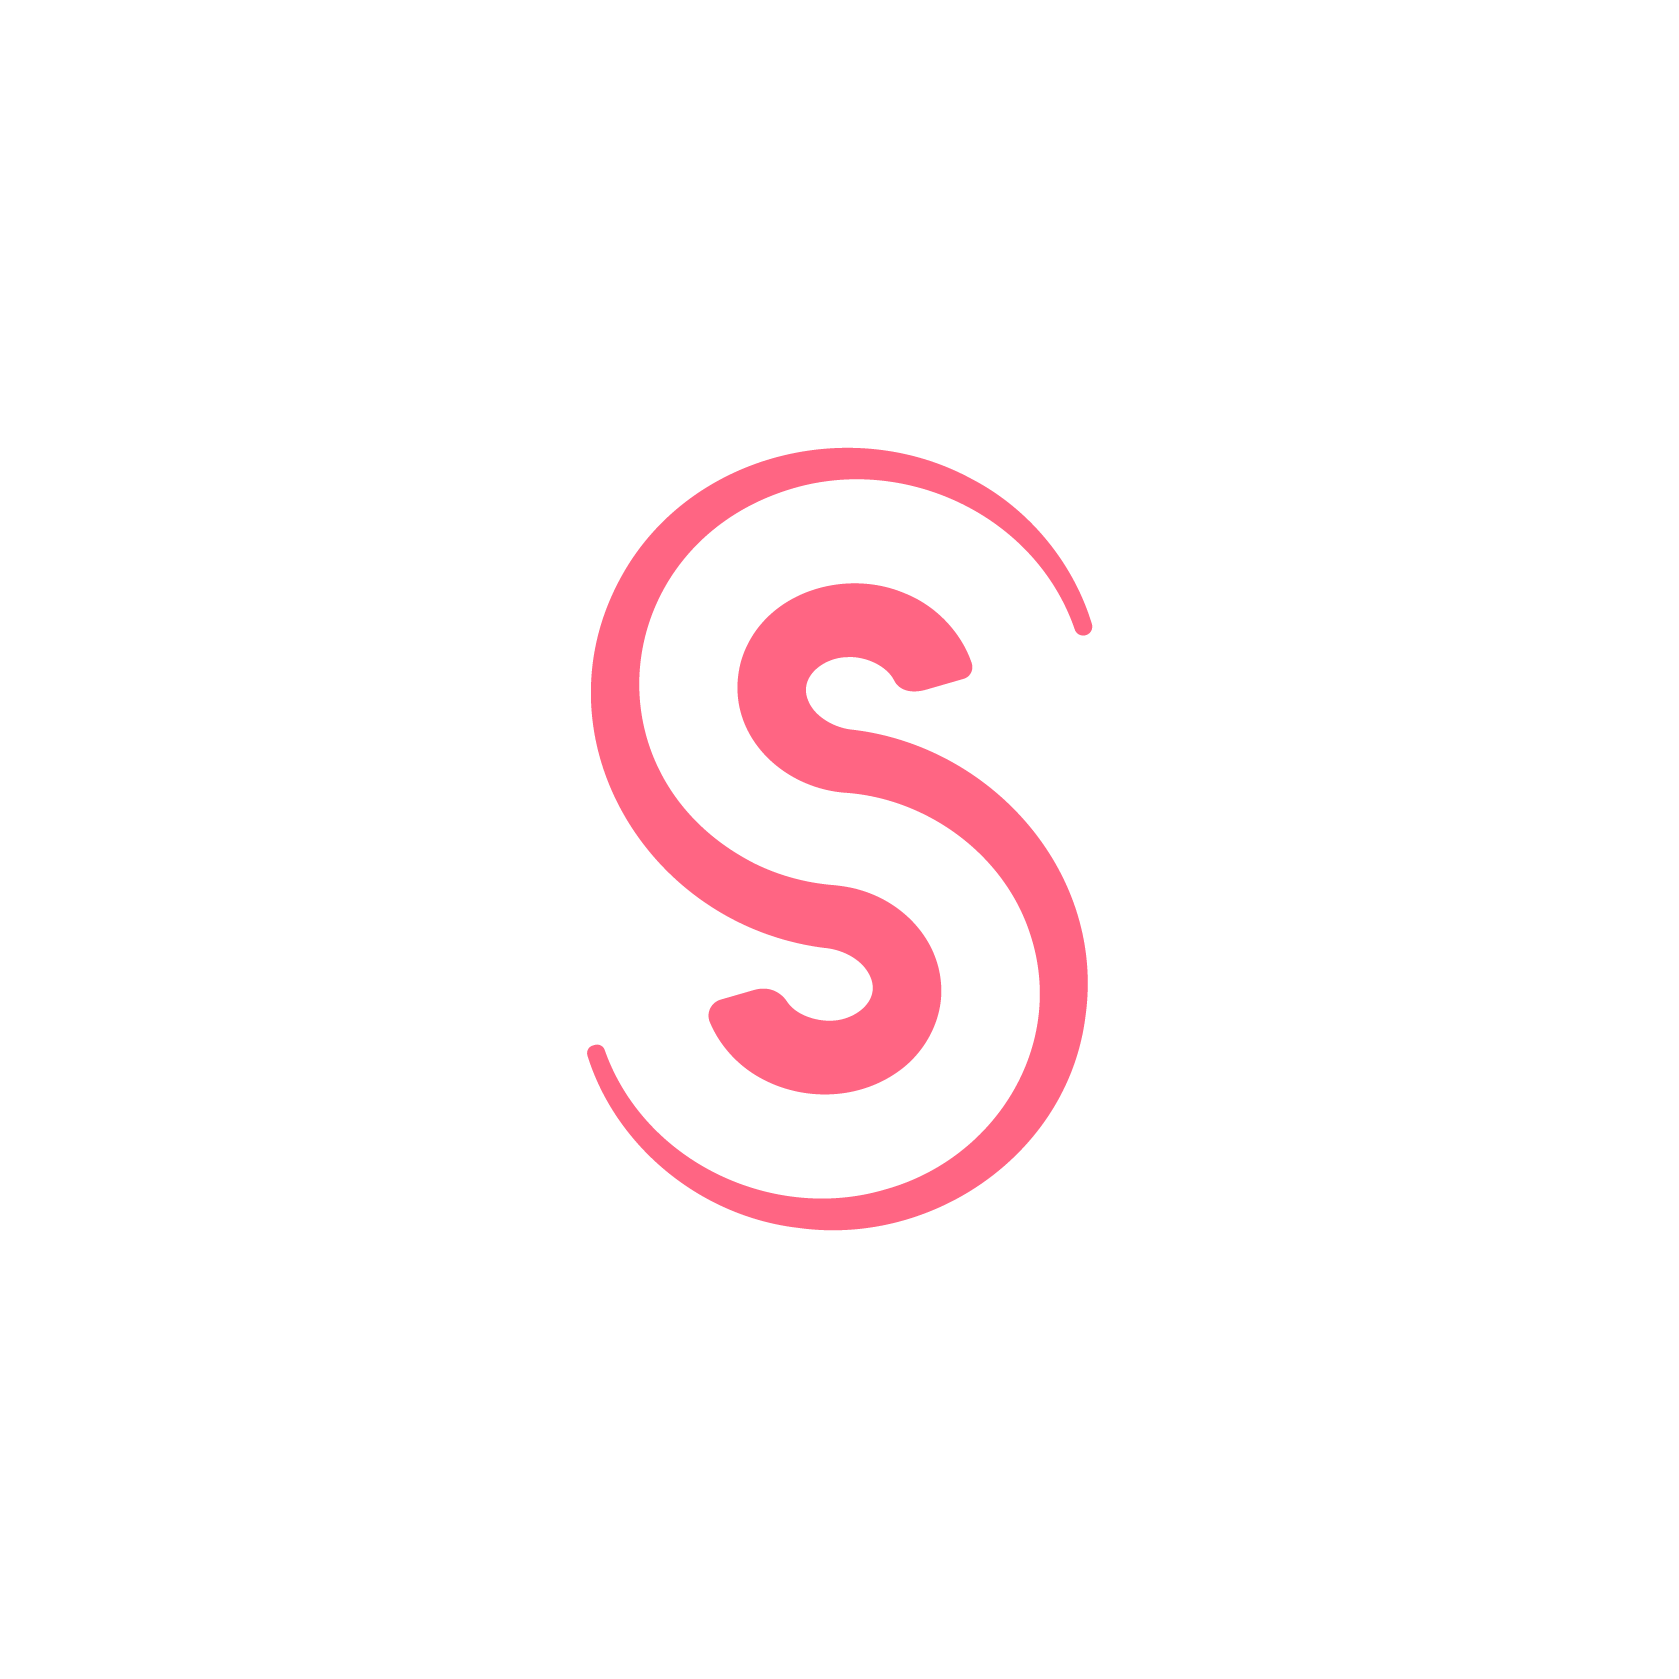 Stylised 'S' logo in pink